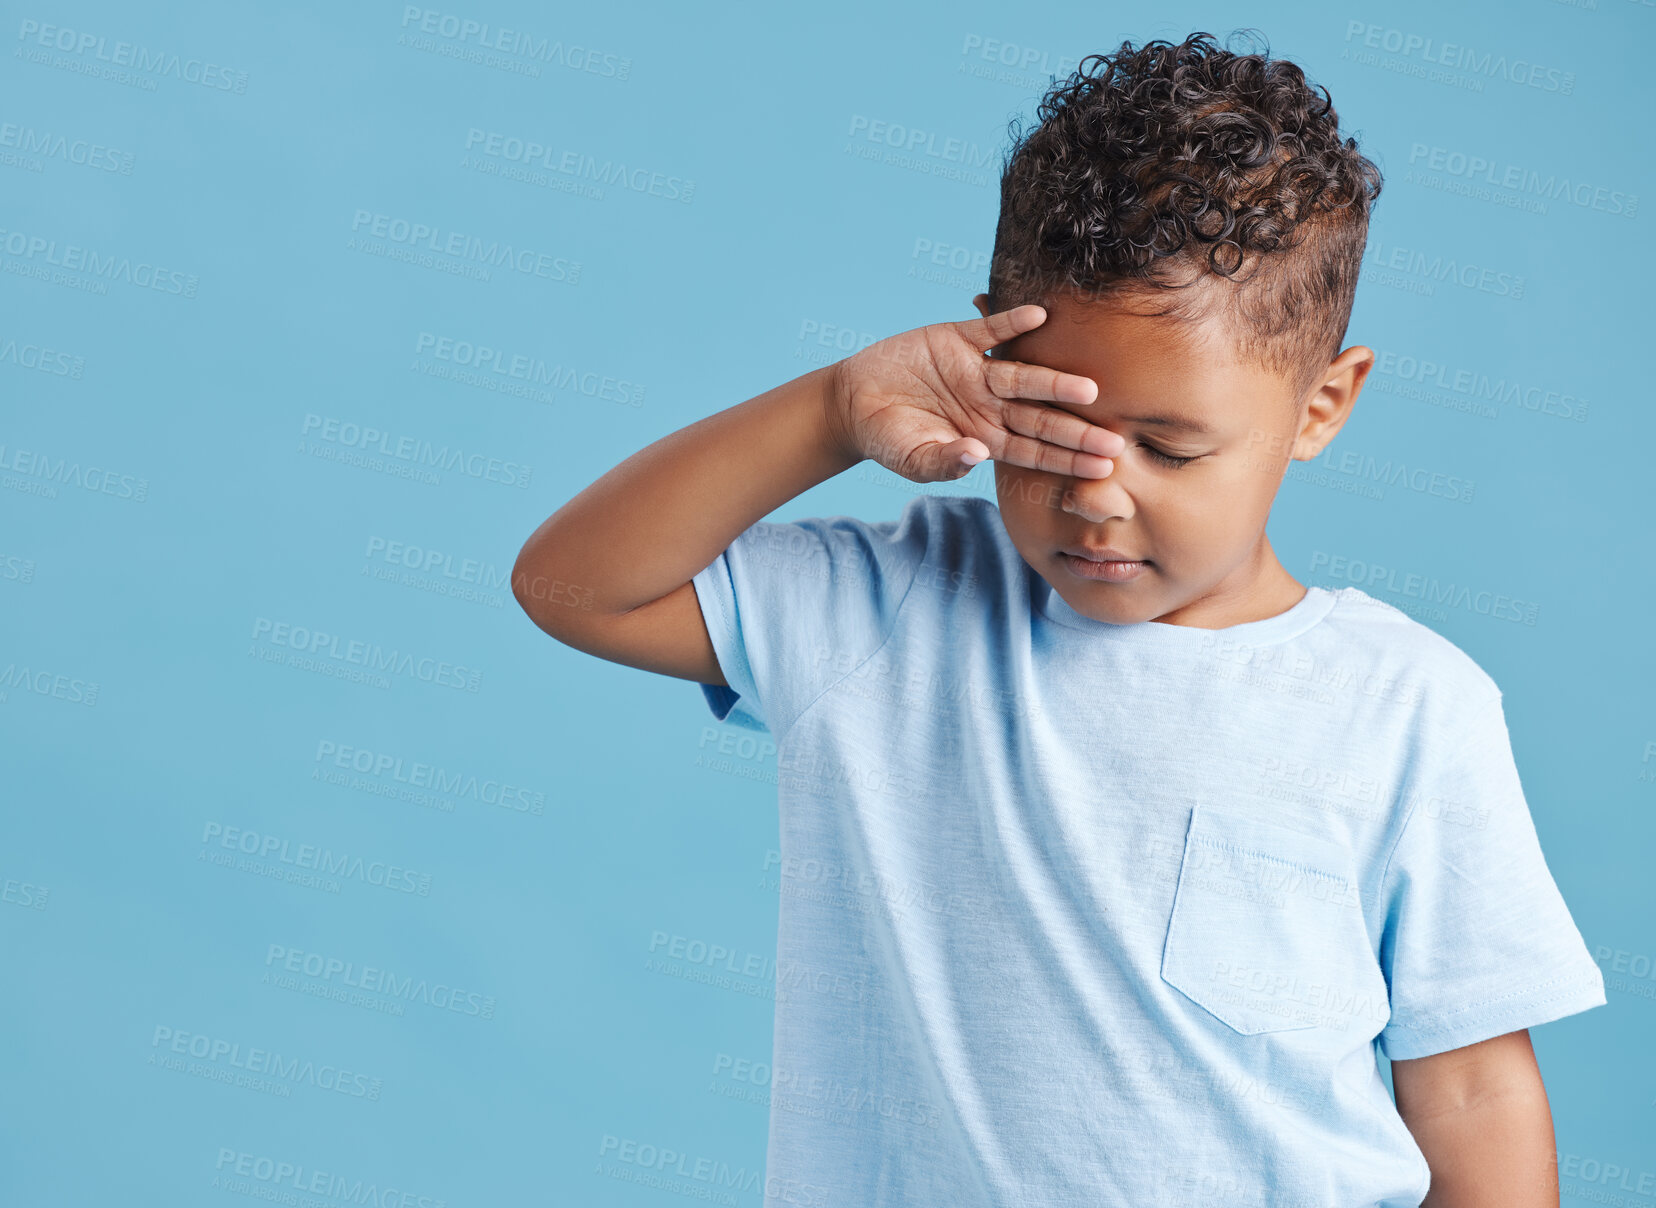 Buy stock photo Sad little hispanic boy looking sad and rubbing his eyes against a blue studio background. Unhappy preschooler crying on his first day